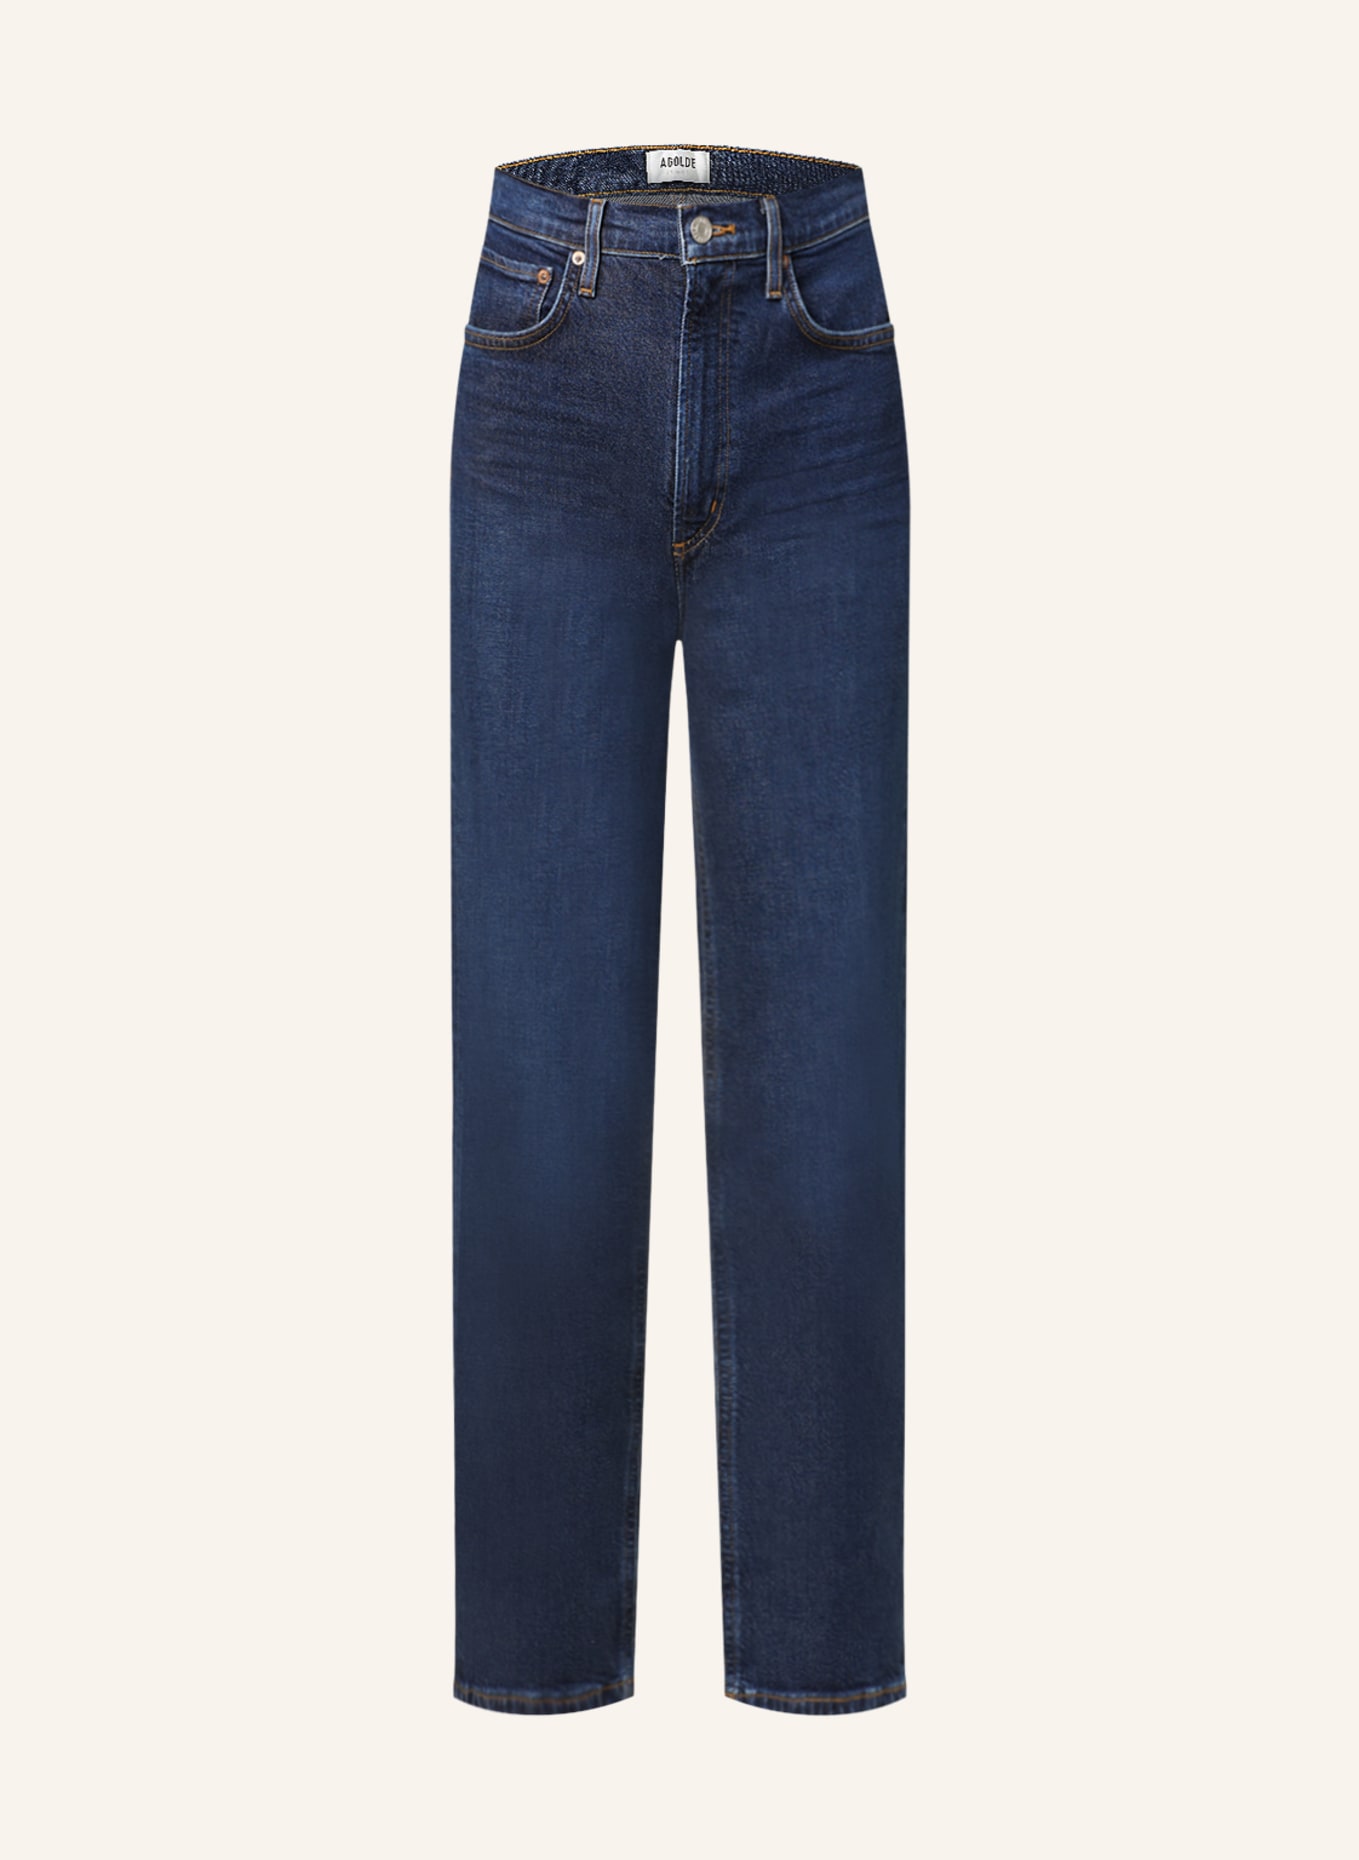 AGOLDE Jeans STOVEPIPE, Farbe: song dk vint ind (Bild 1)